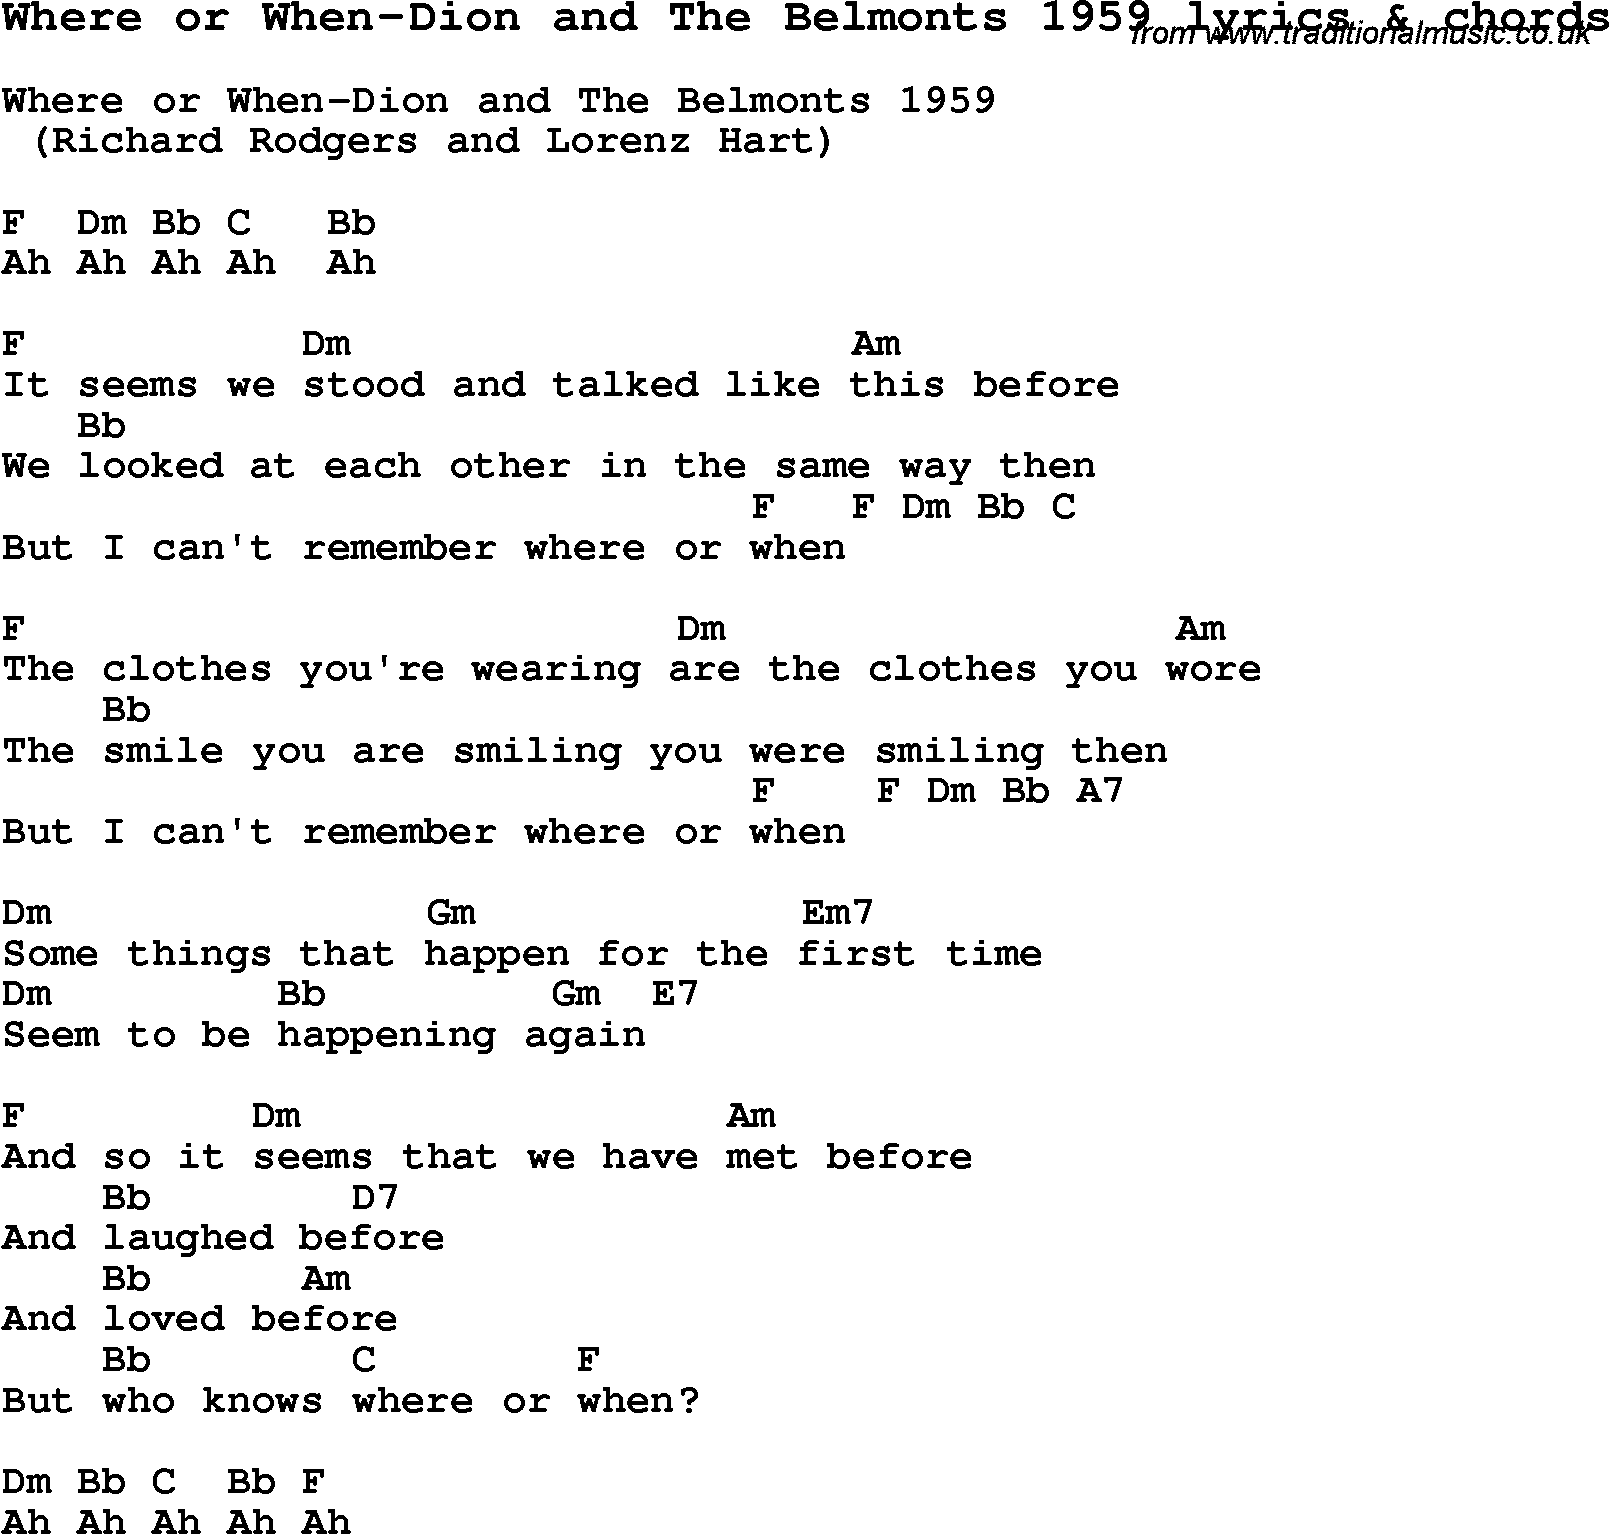 Love Song Lyrics for: Where or When-Dion and The Belmonts 1959 with chords for Ukulele, Guitar Banjo etc.